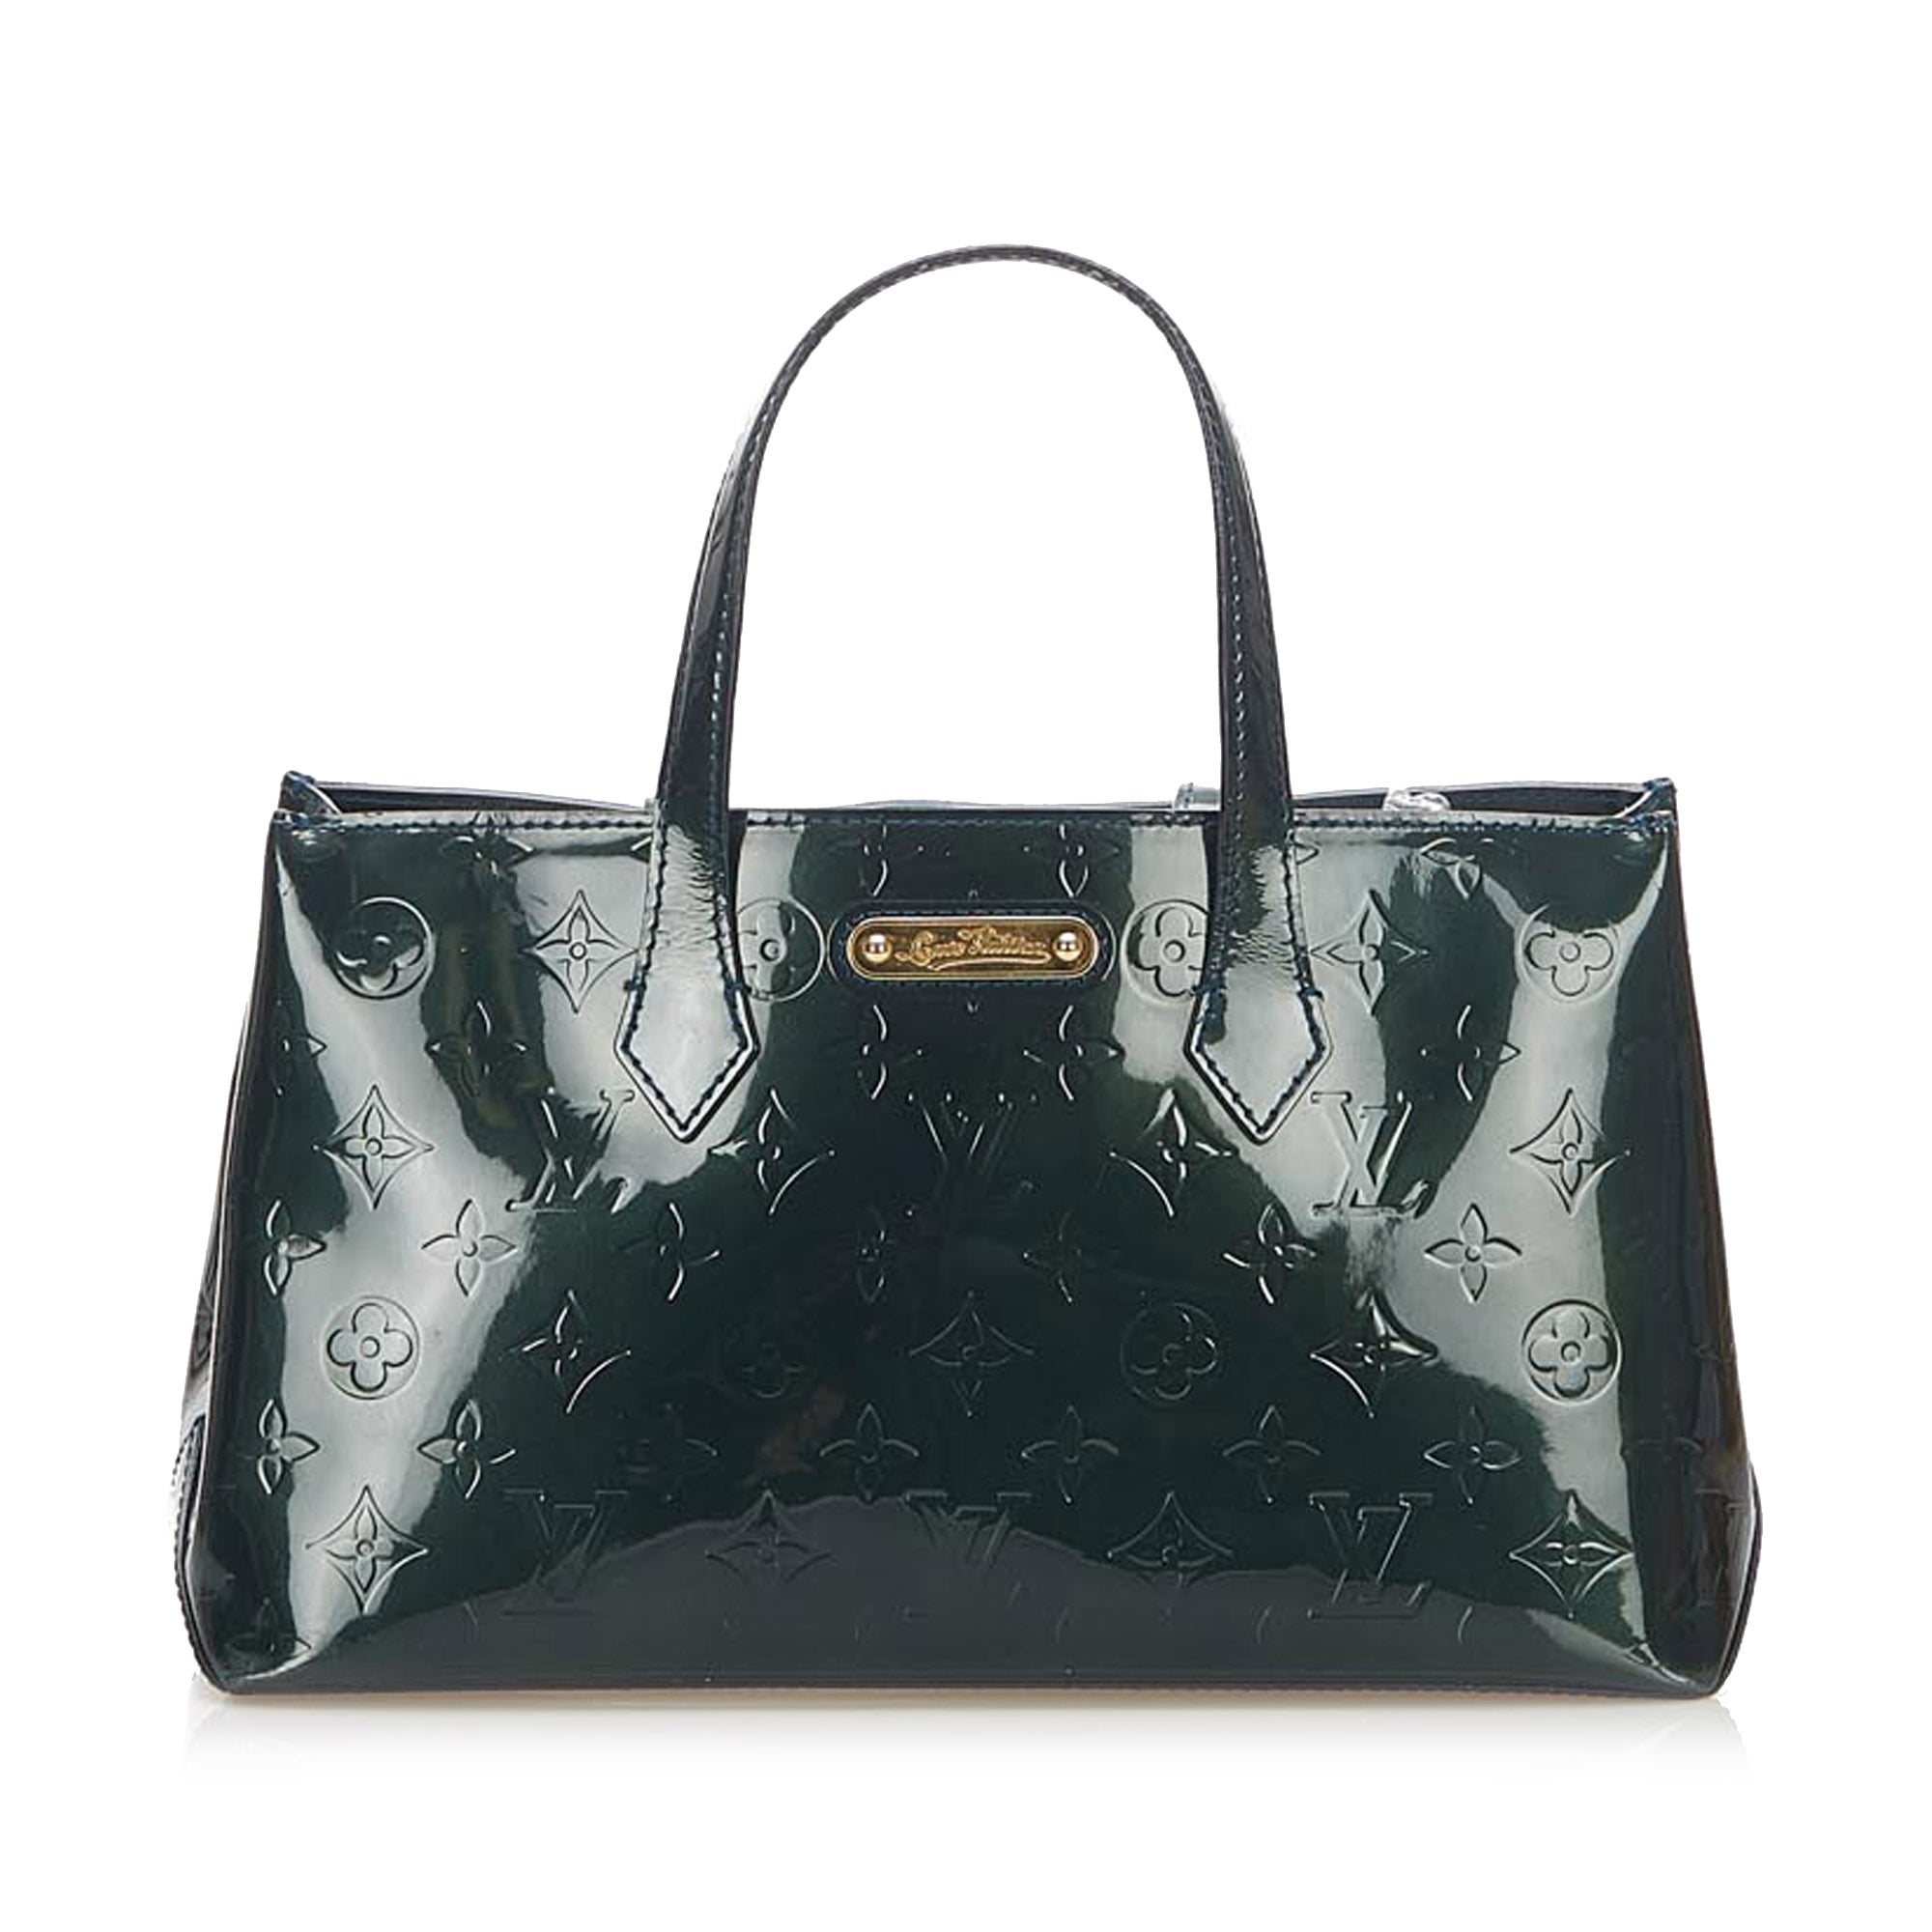 Louis Vuitton Wilshire PM Monogram Vernis Patent Leather Tote on